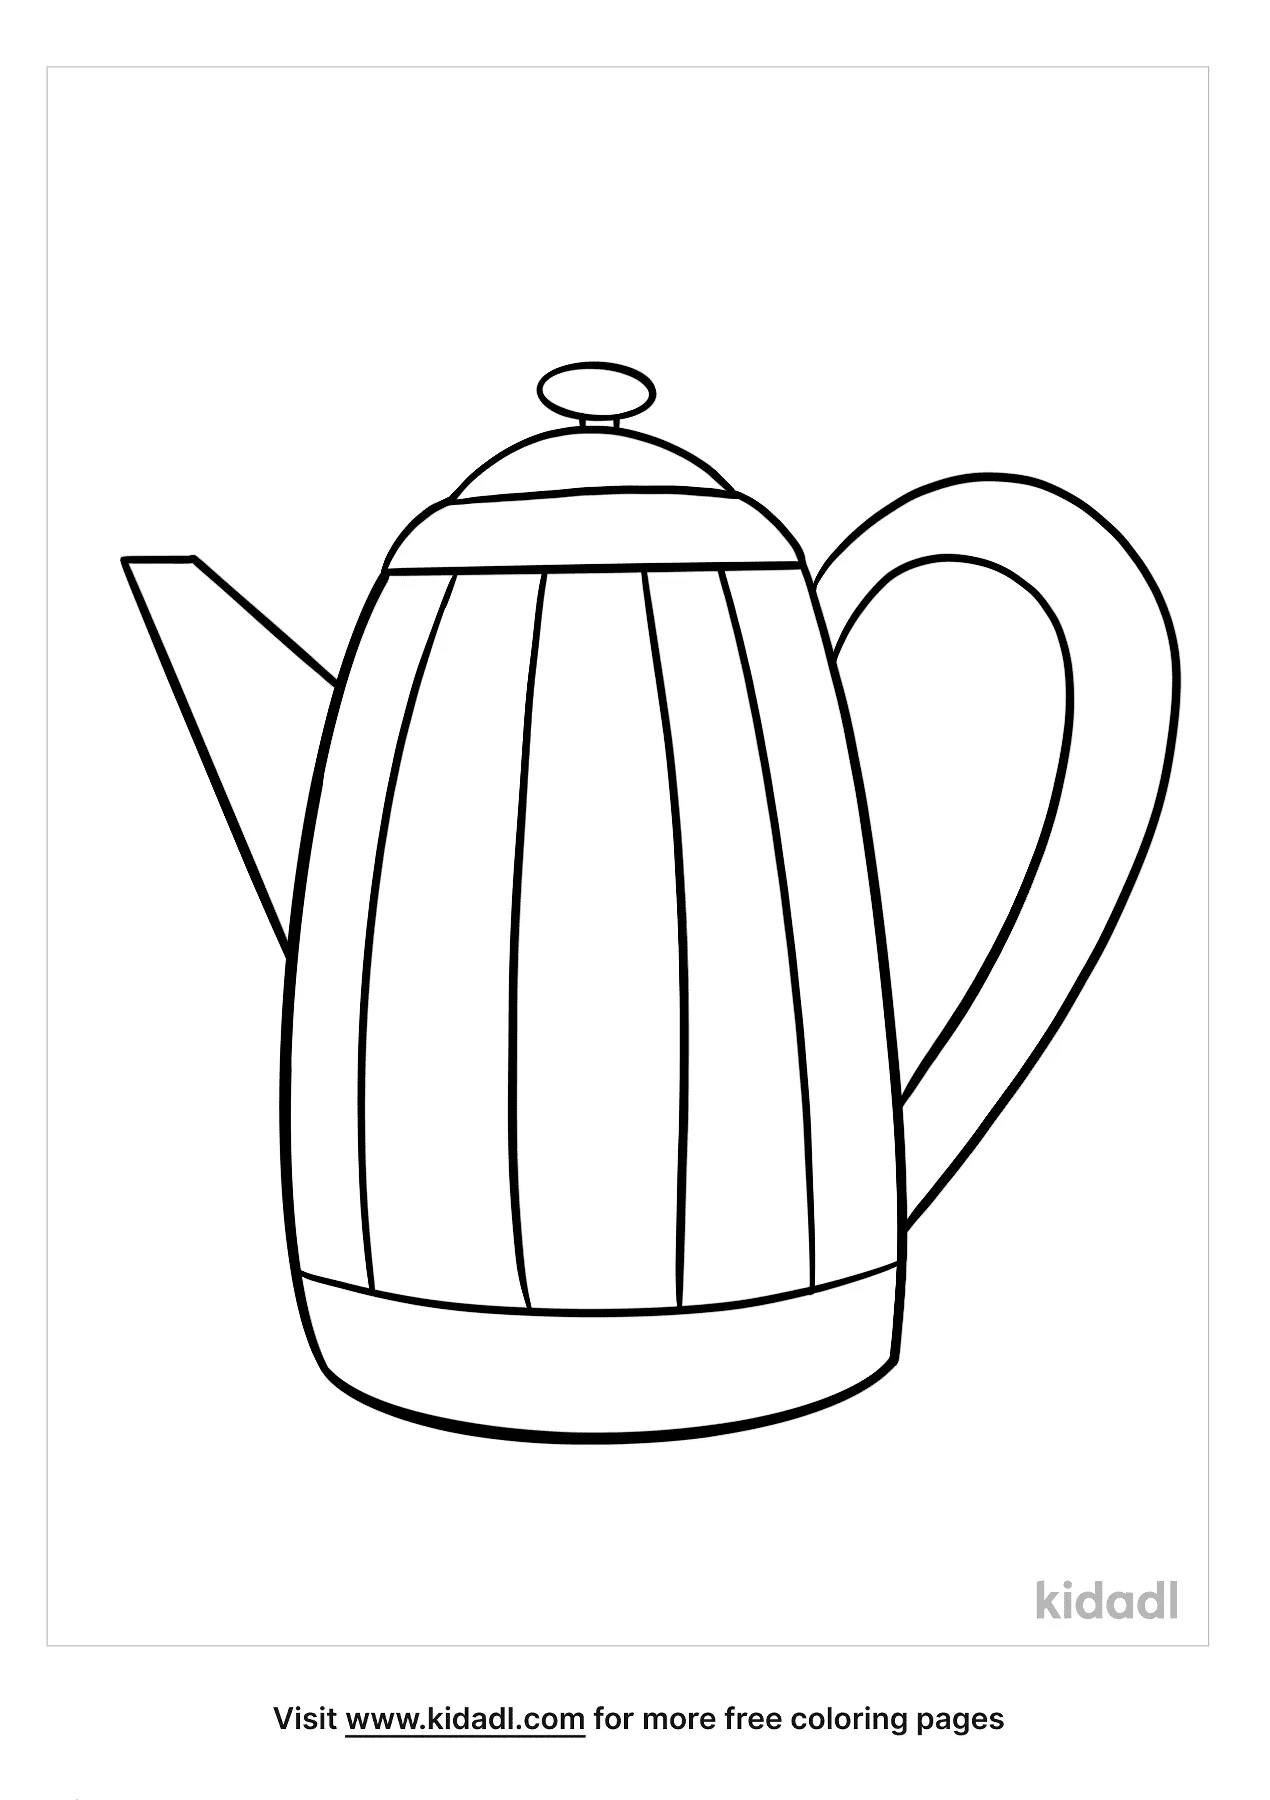 Coffee Pot Coloring Page Lg A96ccf5885 